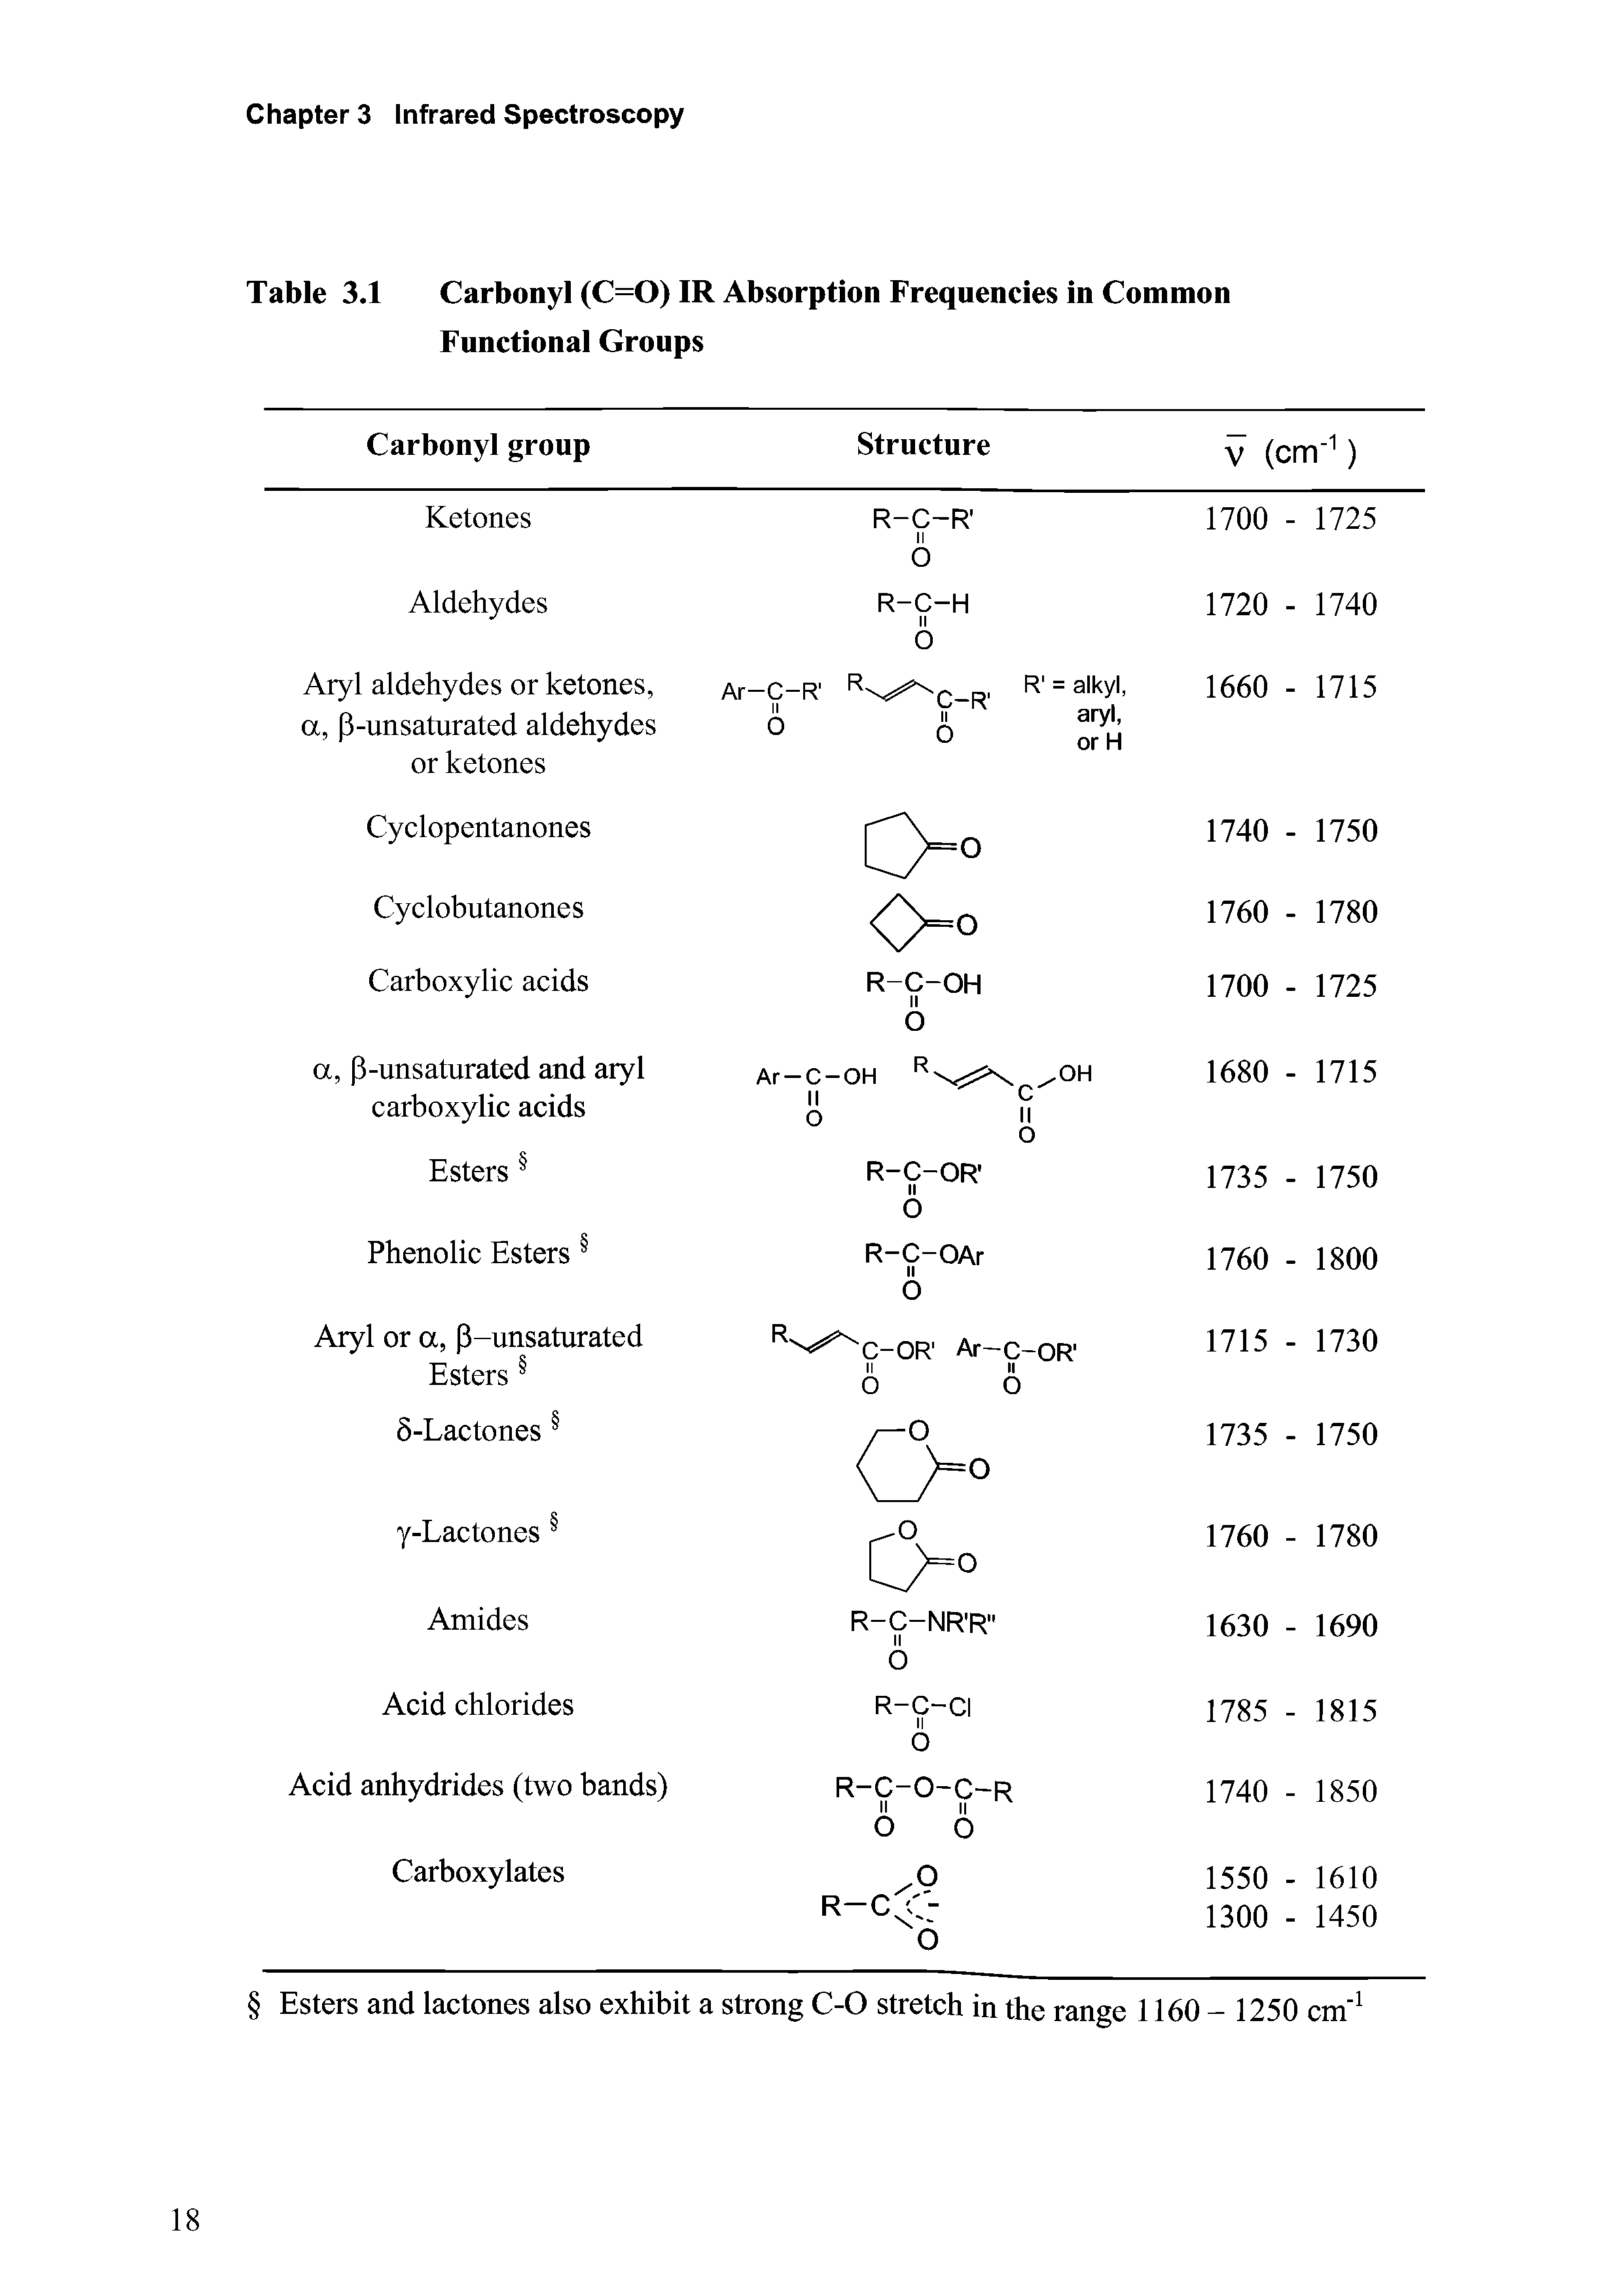 Table 3.1 Carbonyl (C=0) IR Absorption Frequencies in Common Functional Groups...